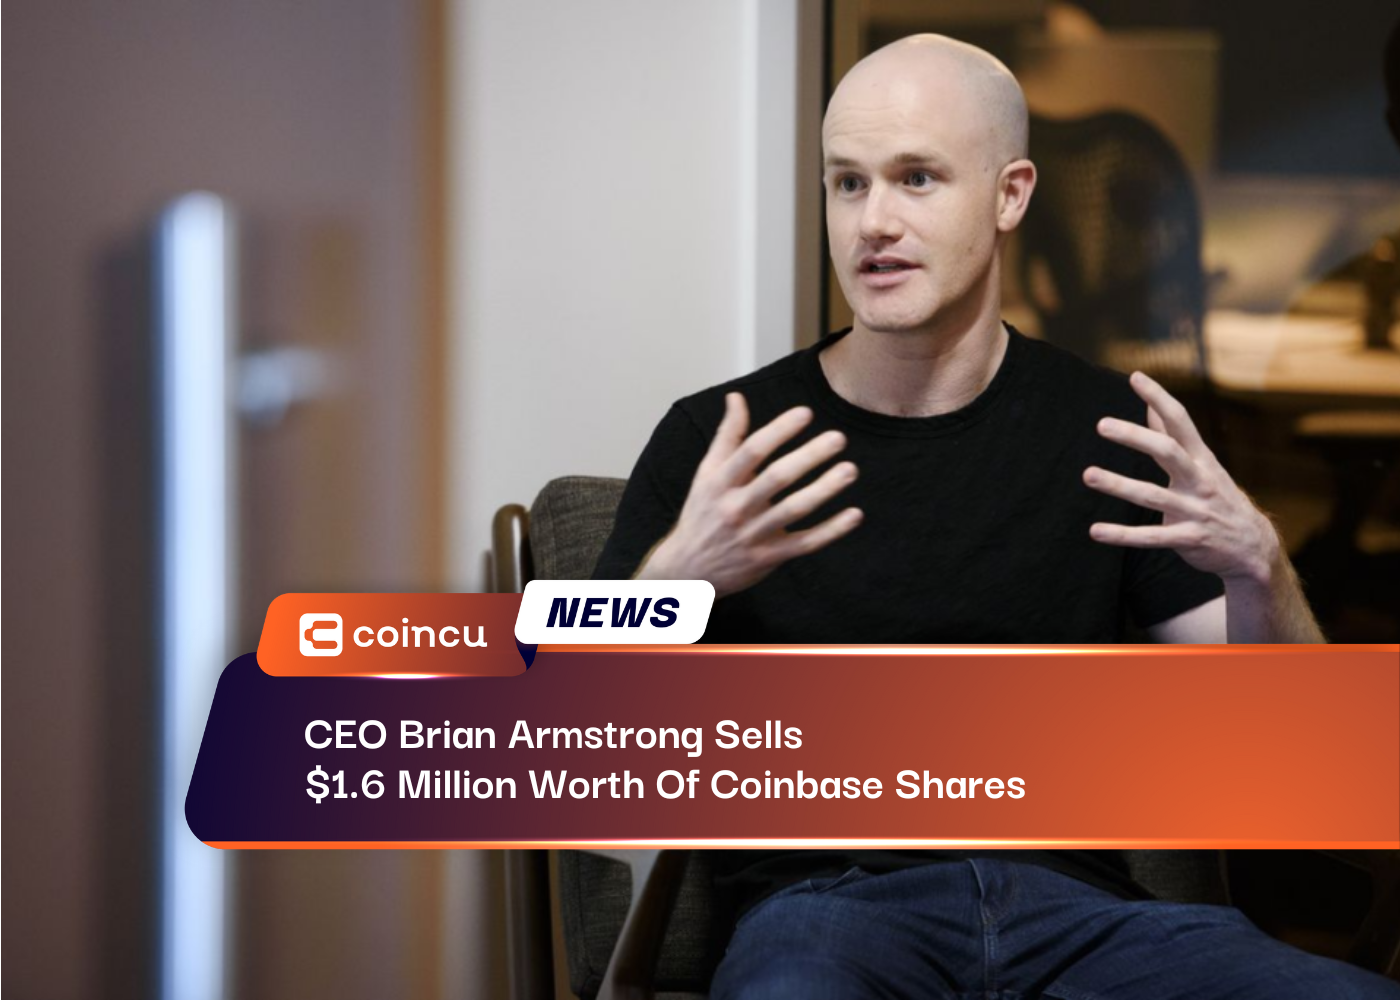 CEO Brian Armstrong Sells $1.6 Million Worth Of Coinbase Shares